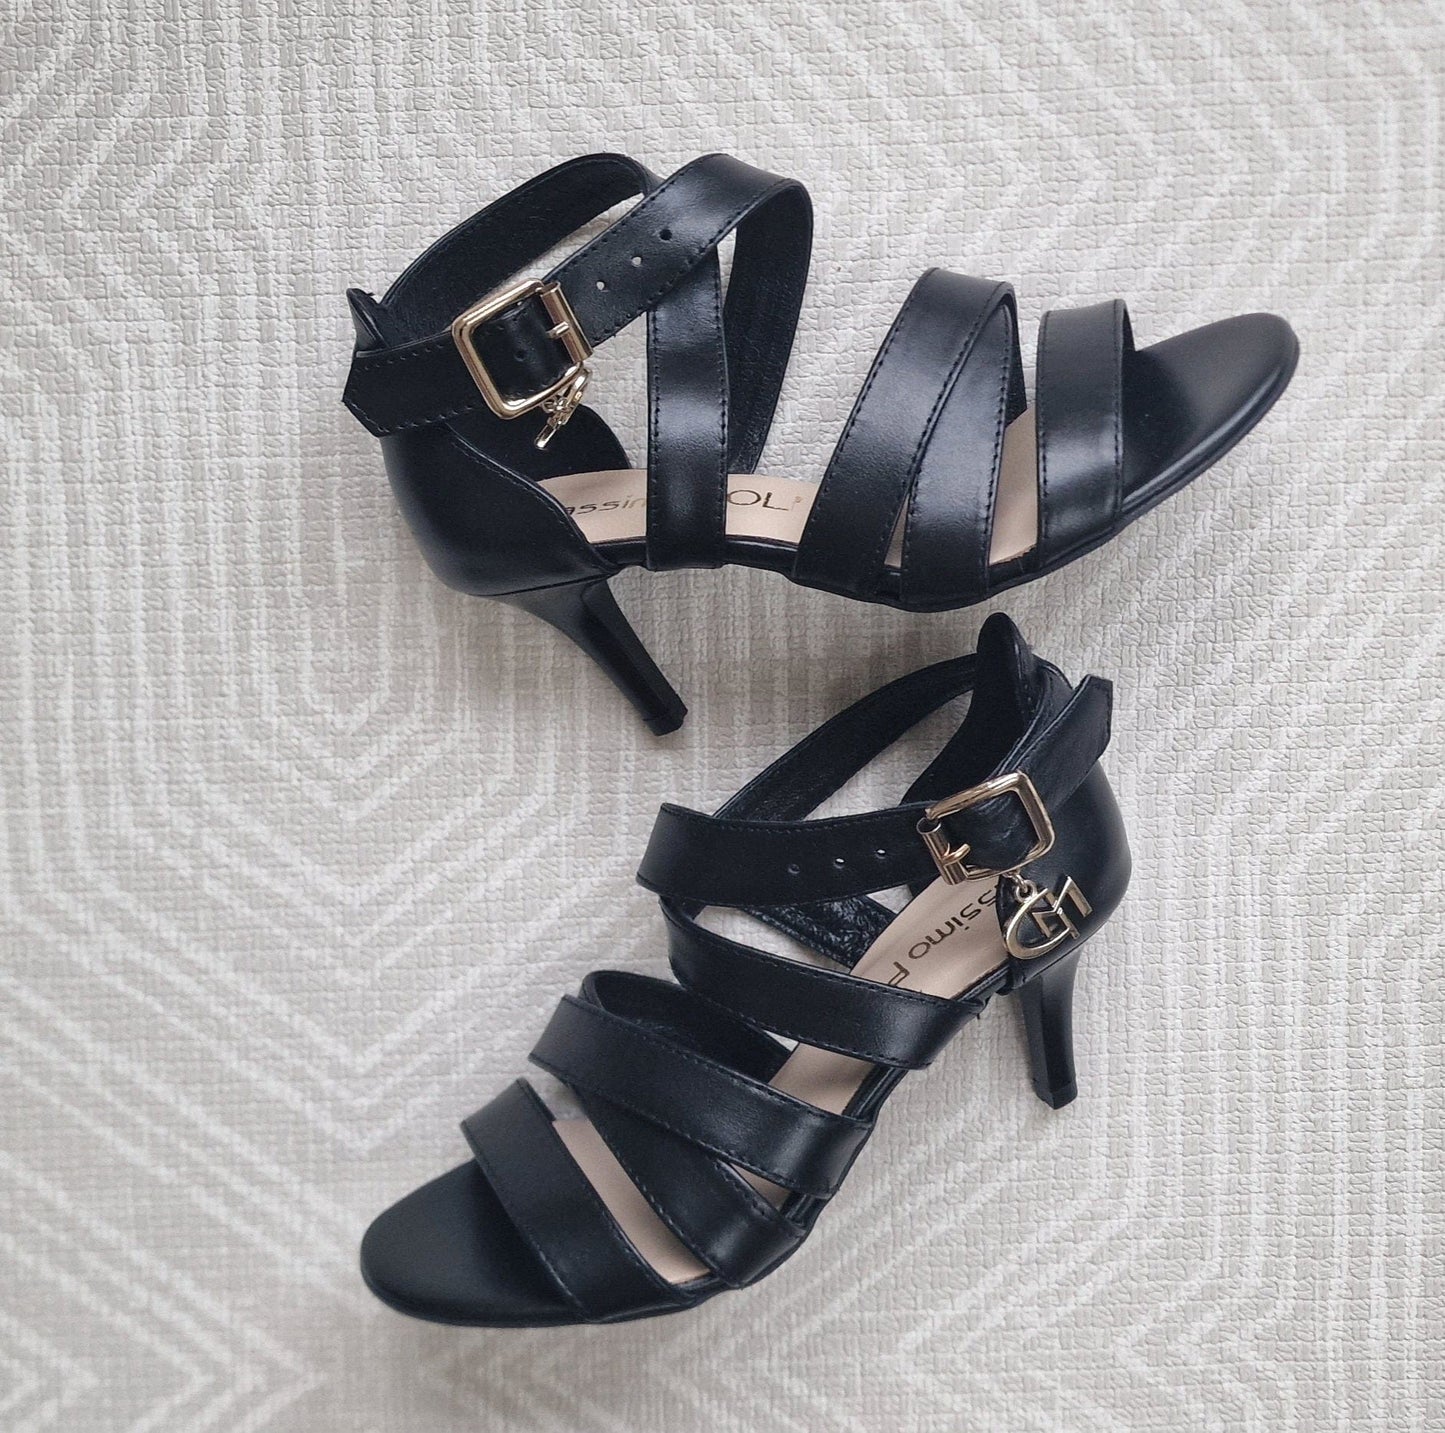 Black leather strappy heels in petite size